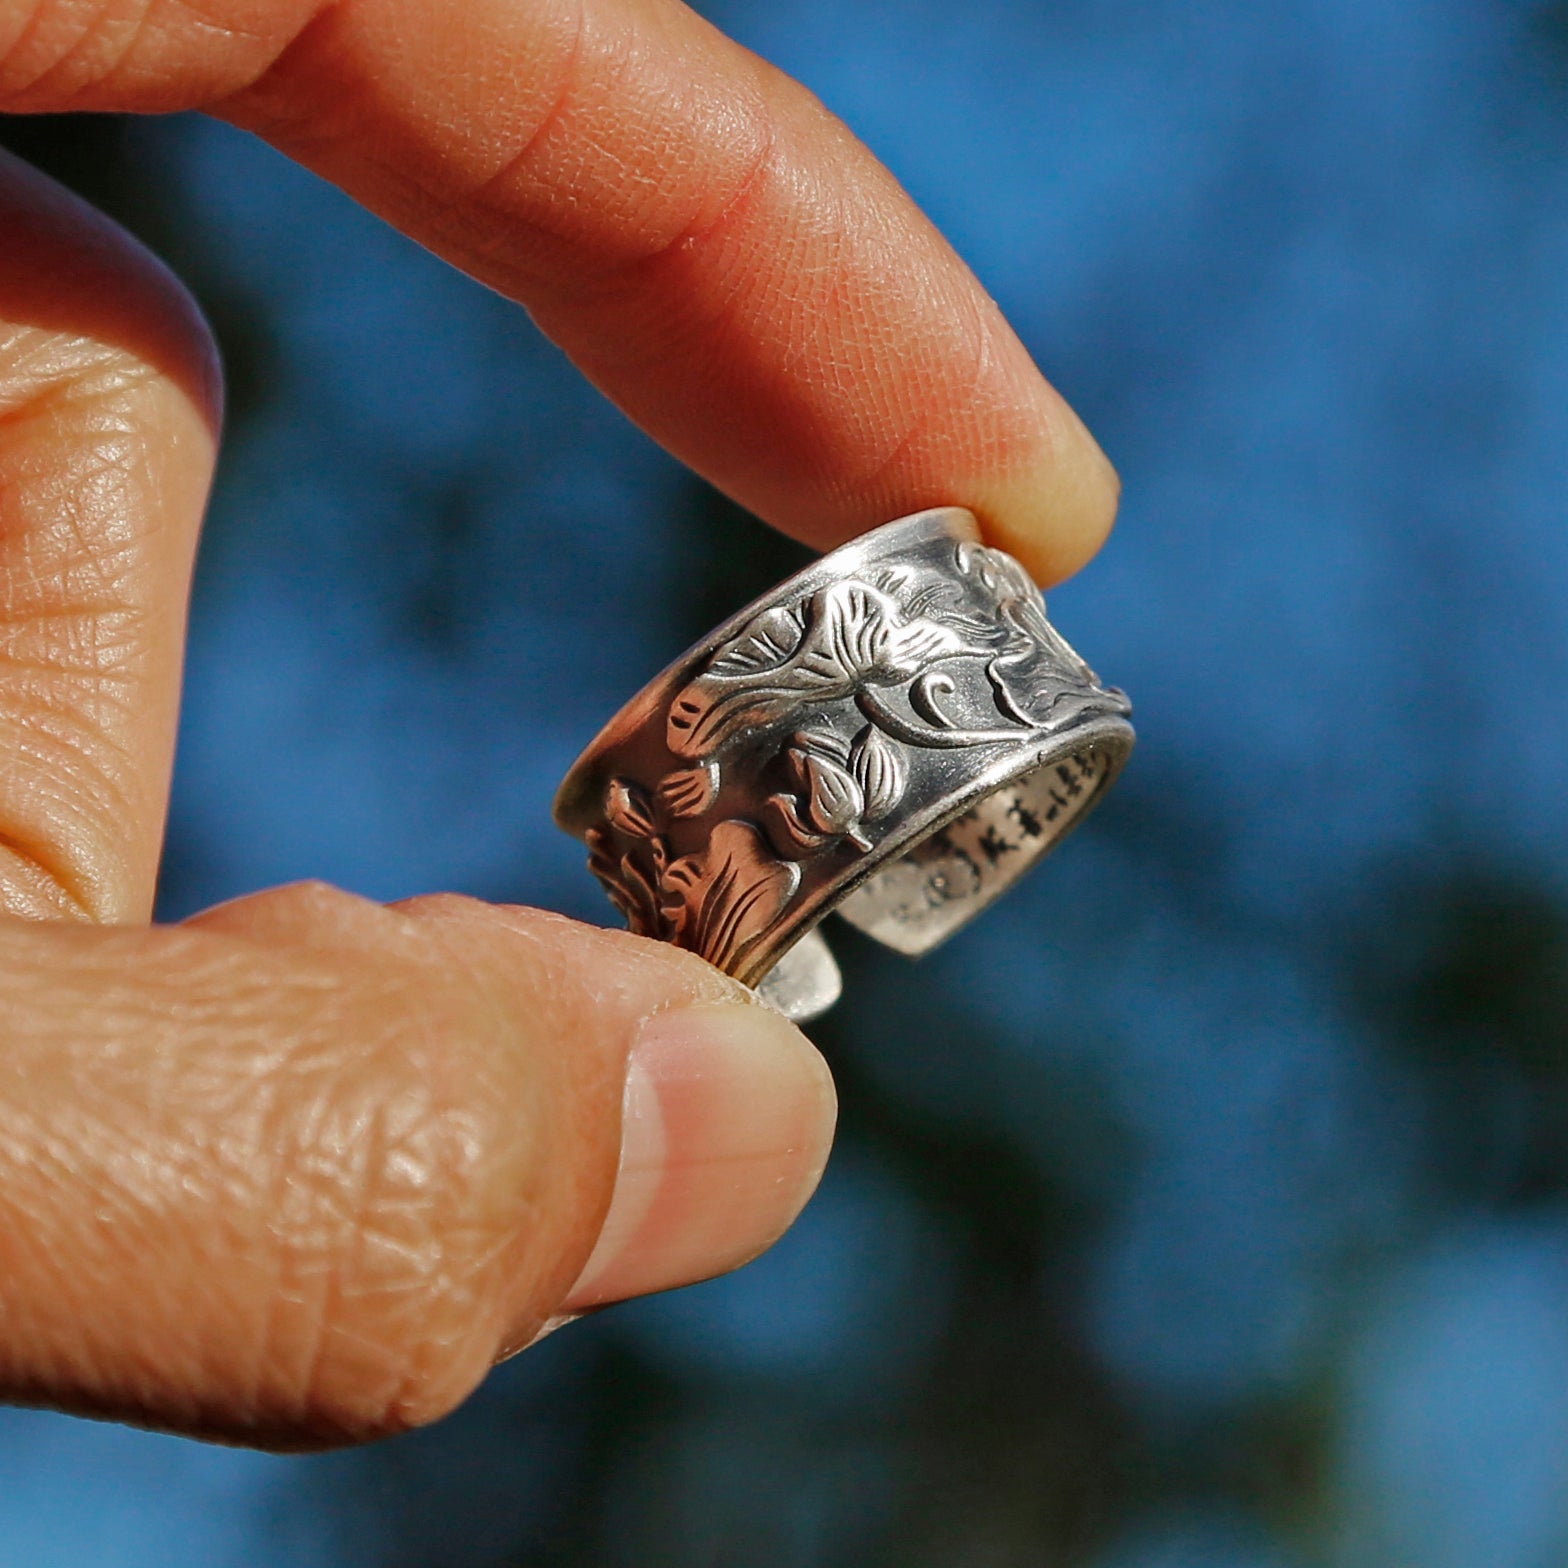 Vintage Style Engraved Lotus Adjustable Silver Ring, Buddhist Sutra Mens Ring - ZentralDesigns